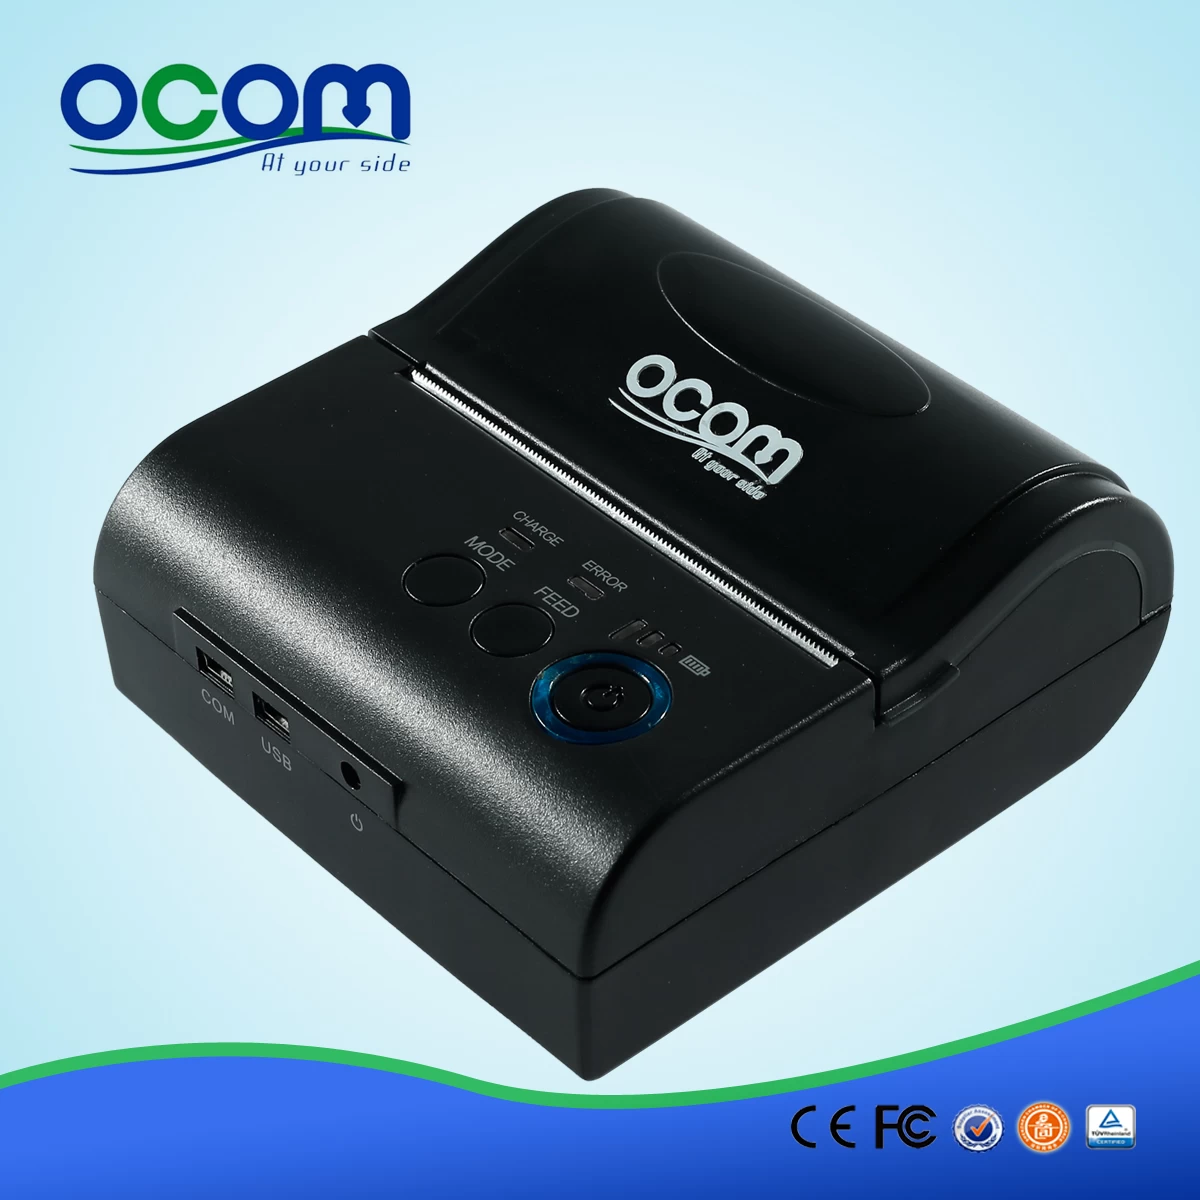 3 inch Android or IOS Bluetooth Thermal Printer---OCPP-M082